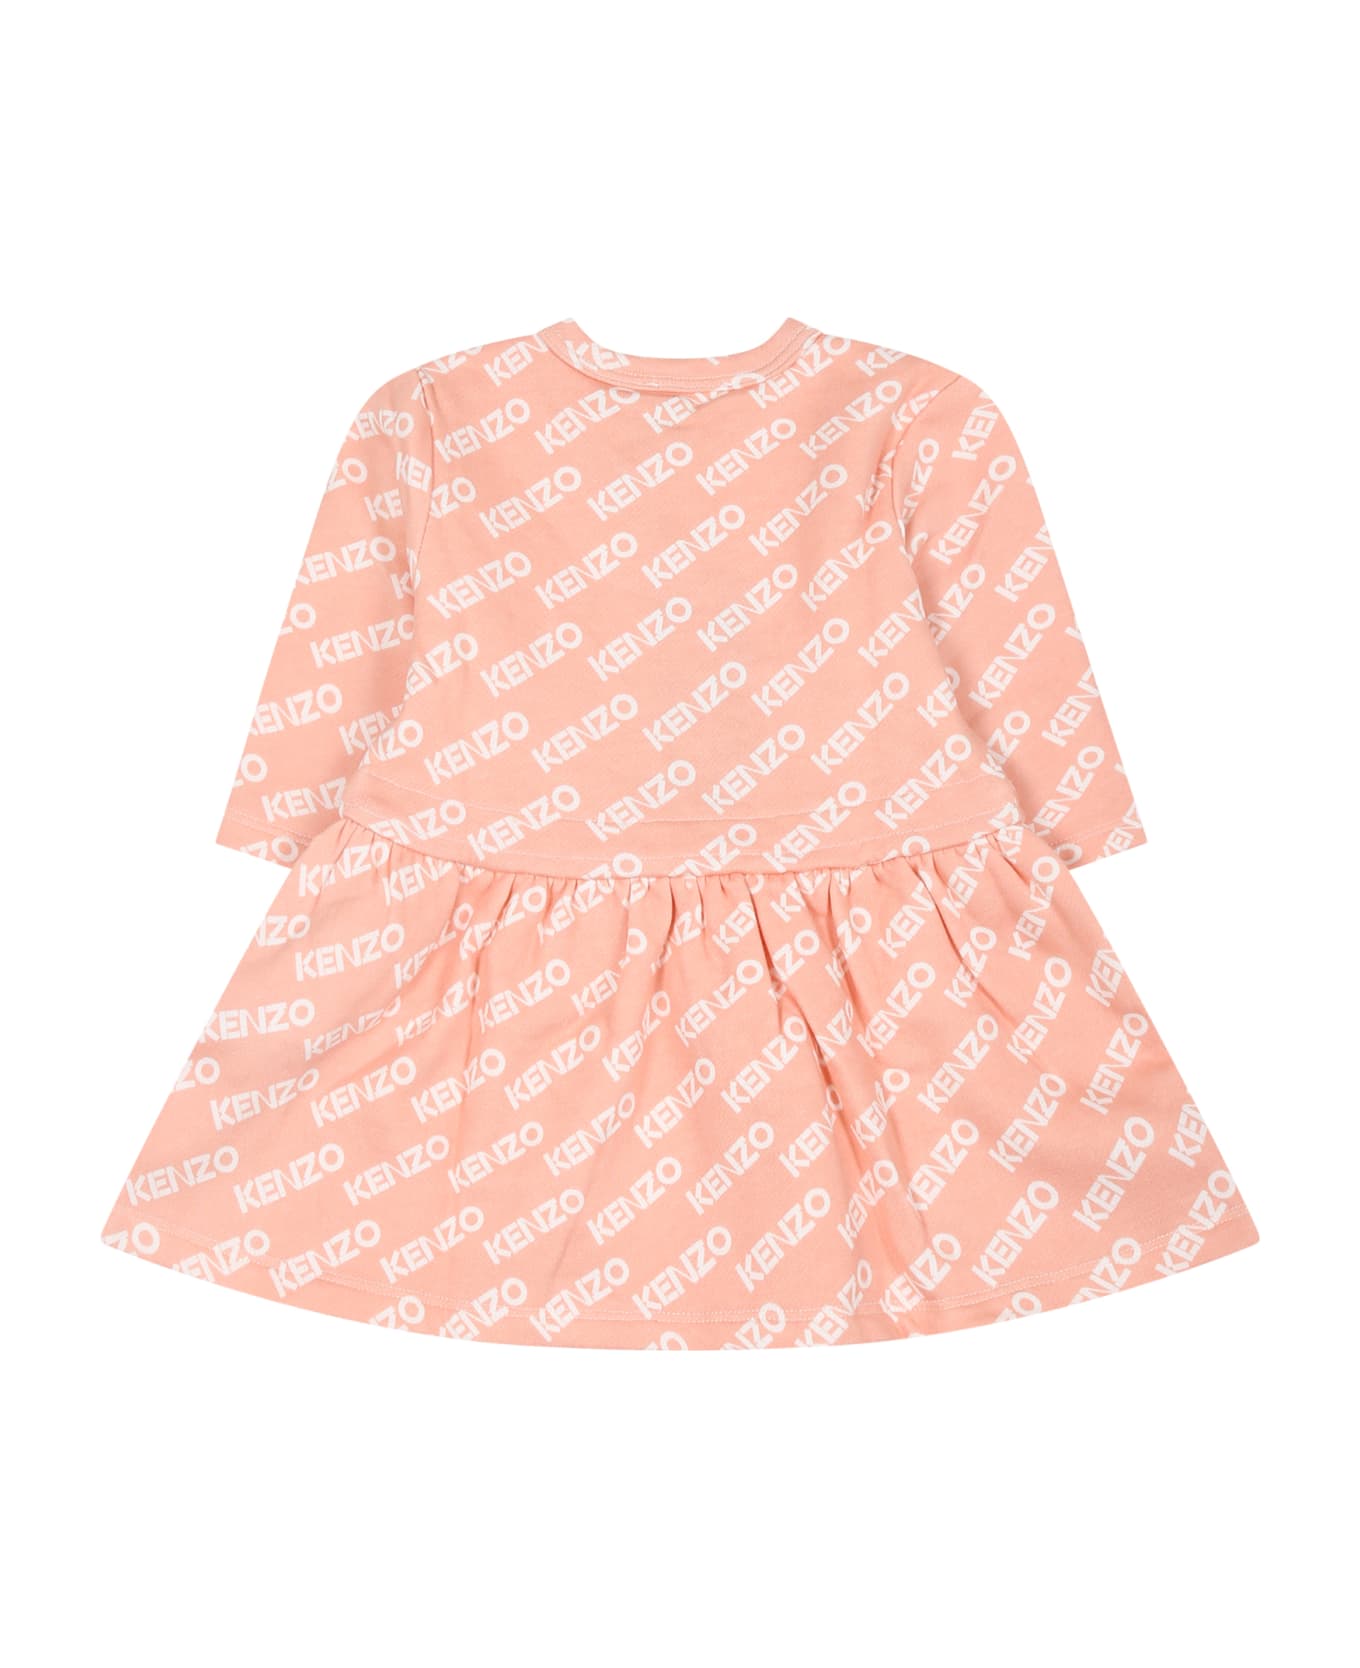 Kenzo Kids Pink Dress For Baby Girl With Logo - Pink